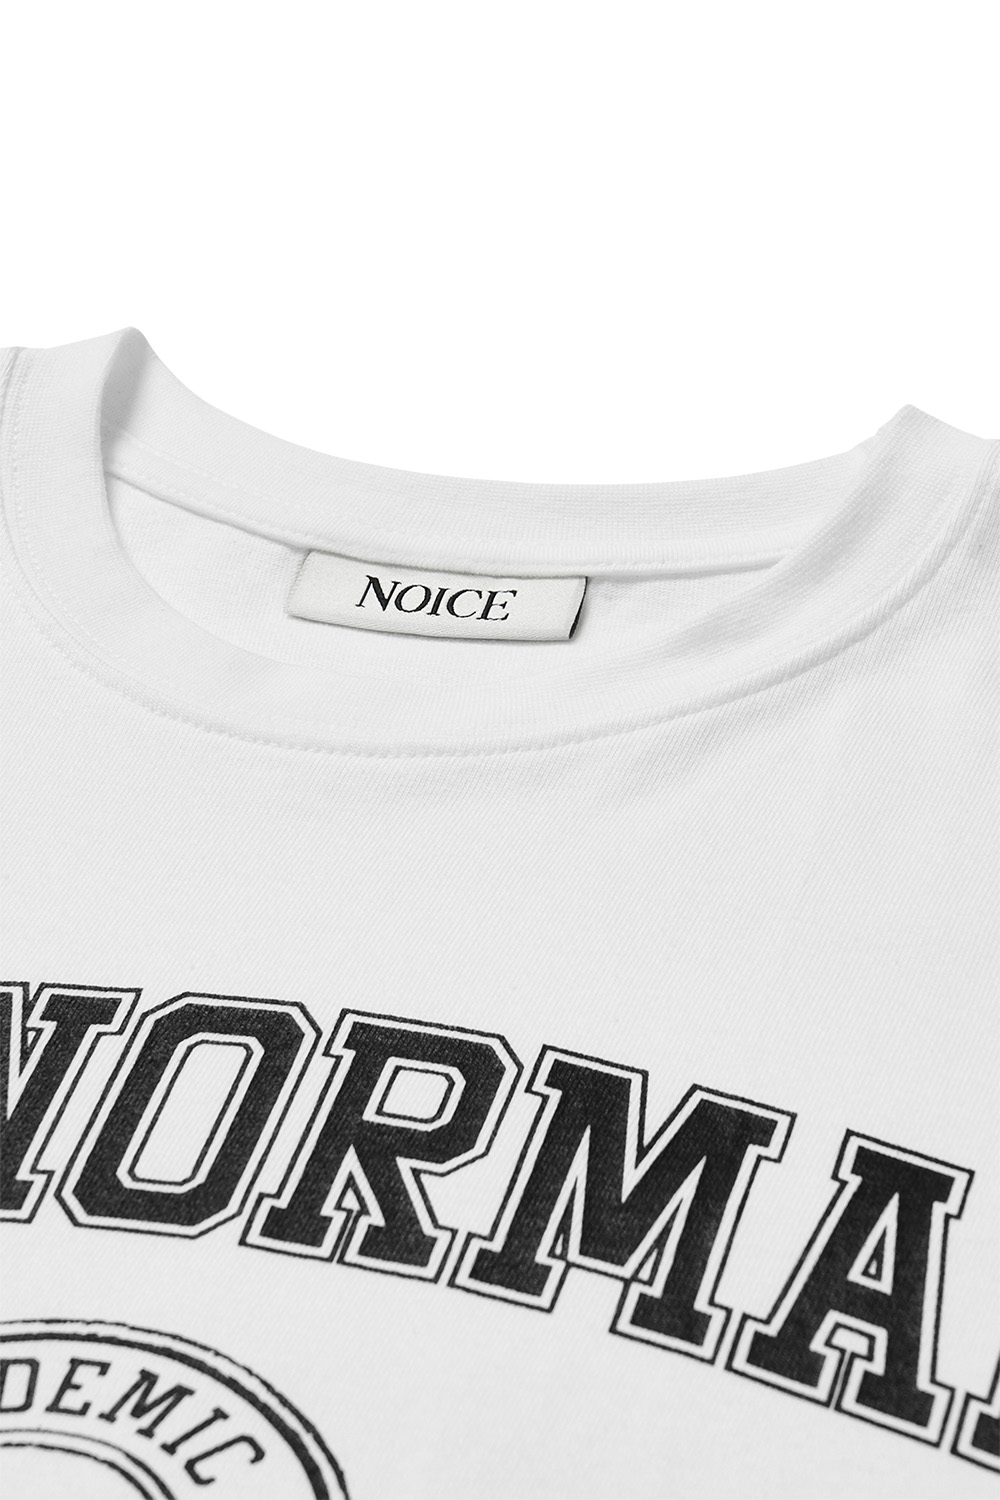 W NEW NORMAL T-SHIRTS WHITE